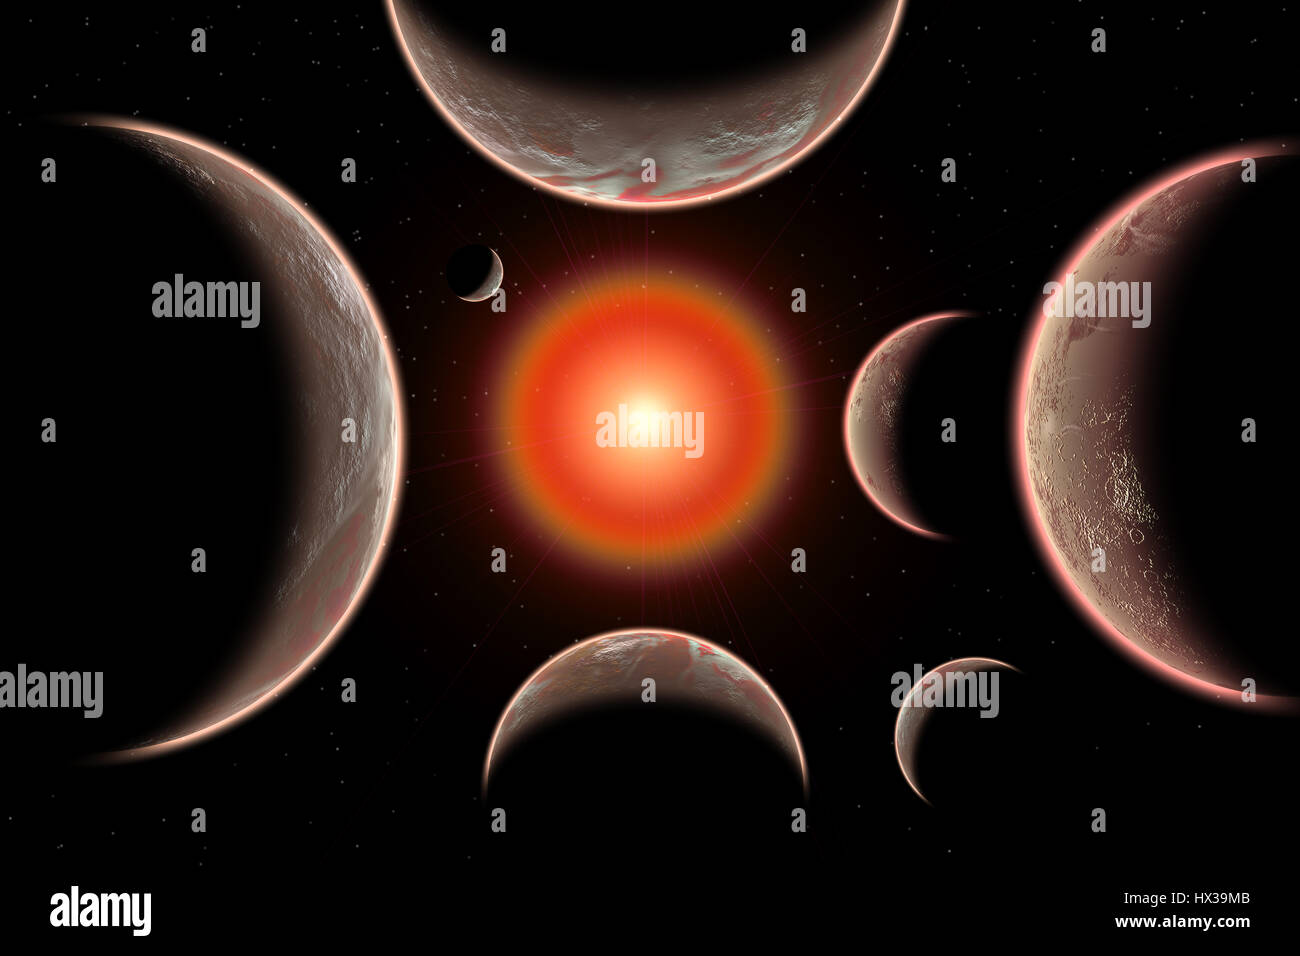 The Trappist Star System Consisting Of 7 Exoplanets. Stock Photo